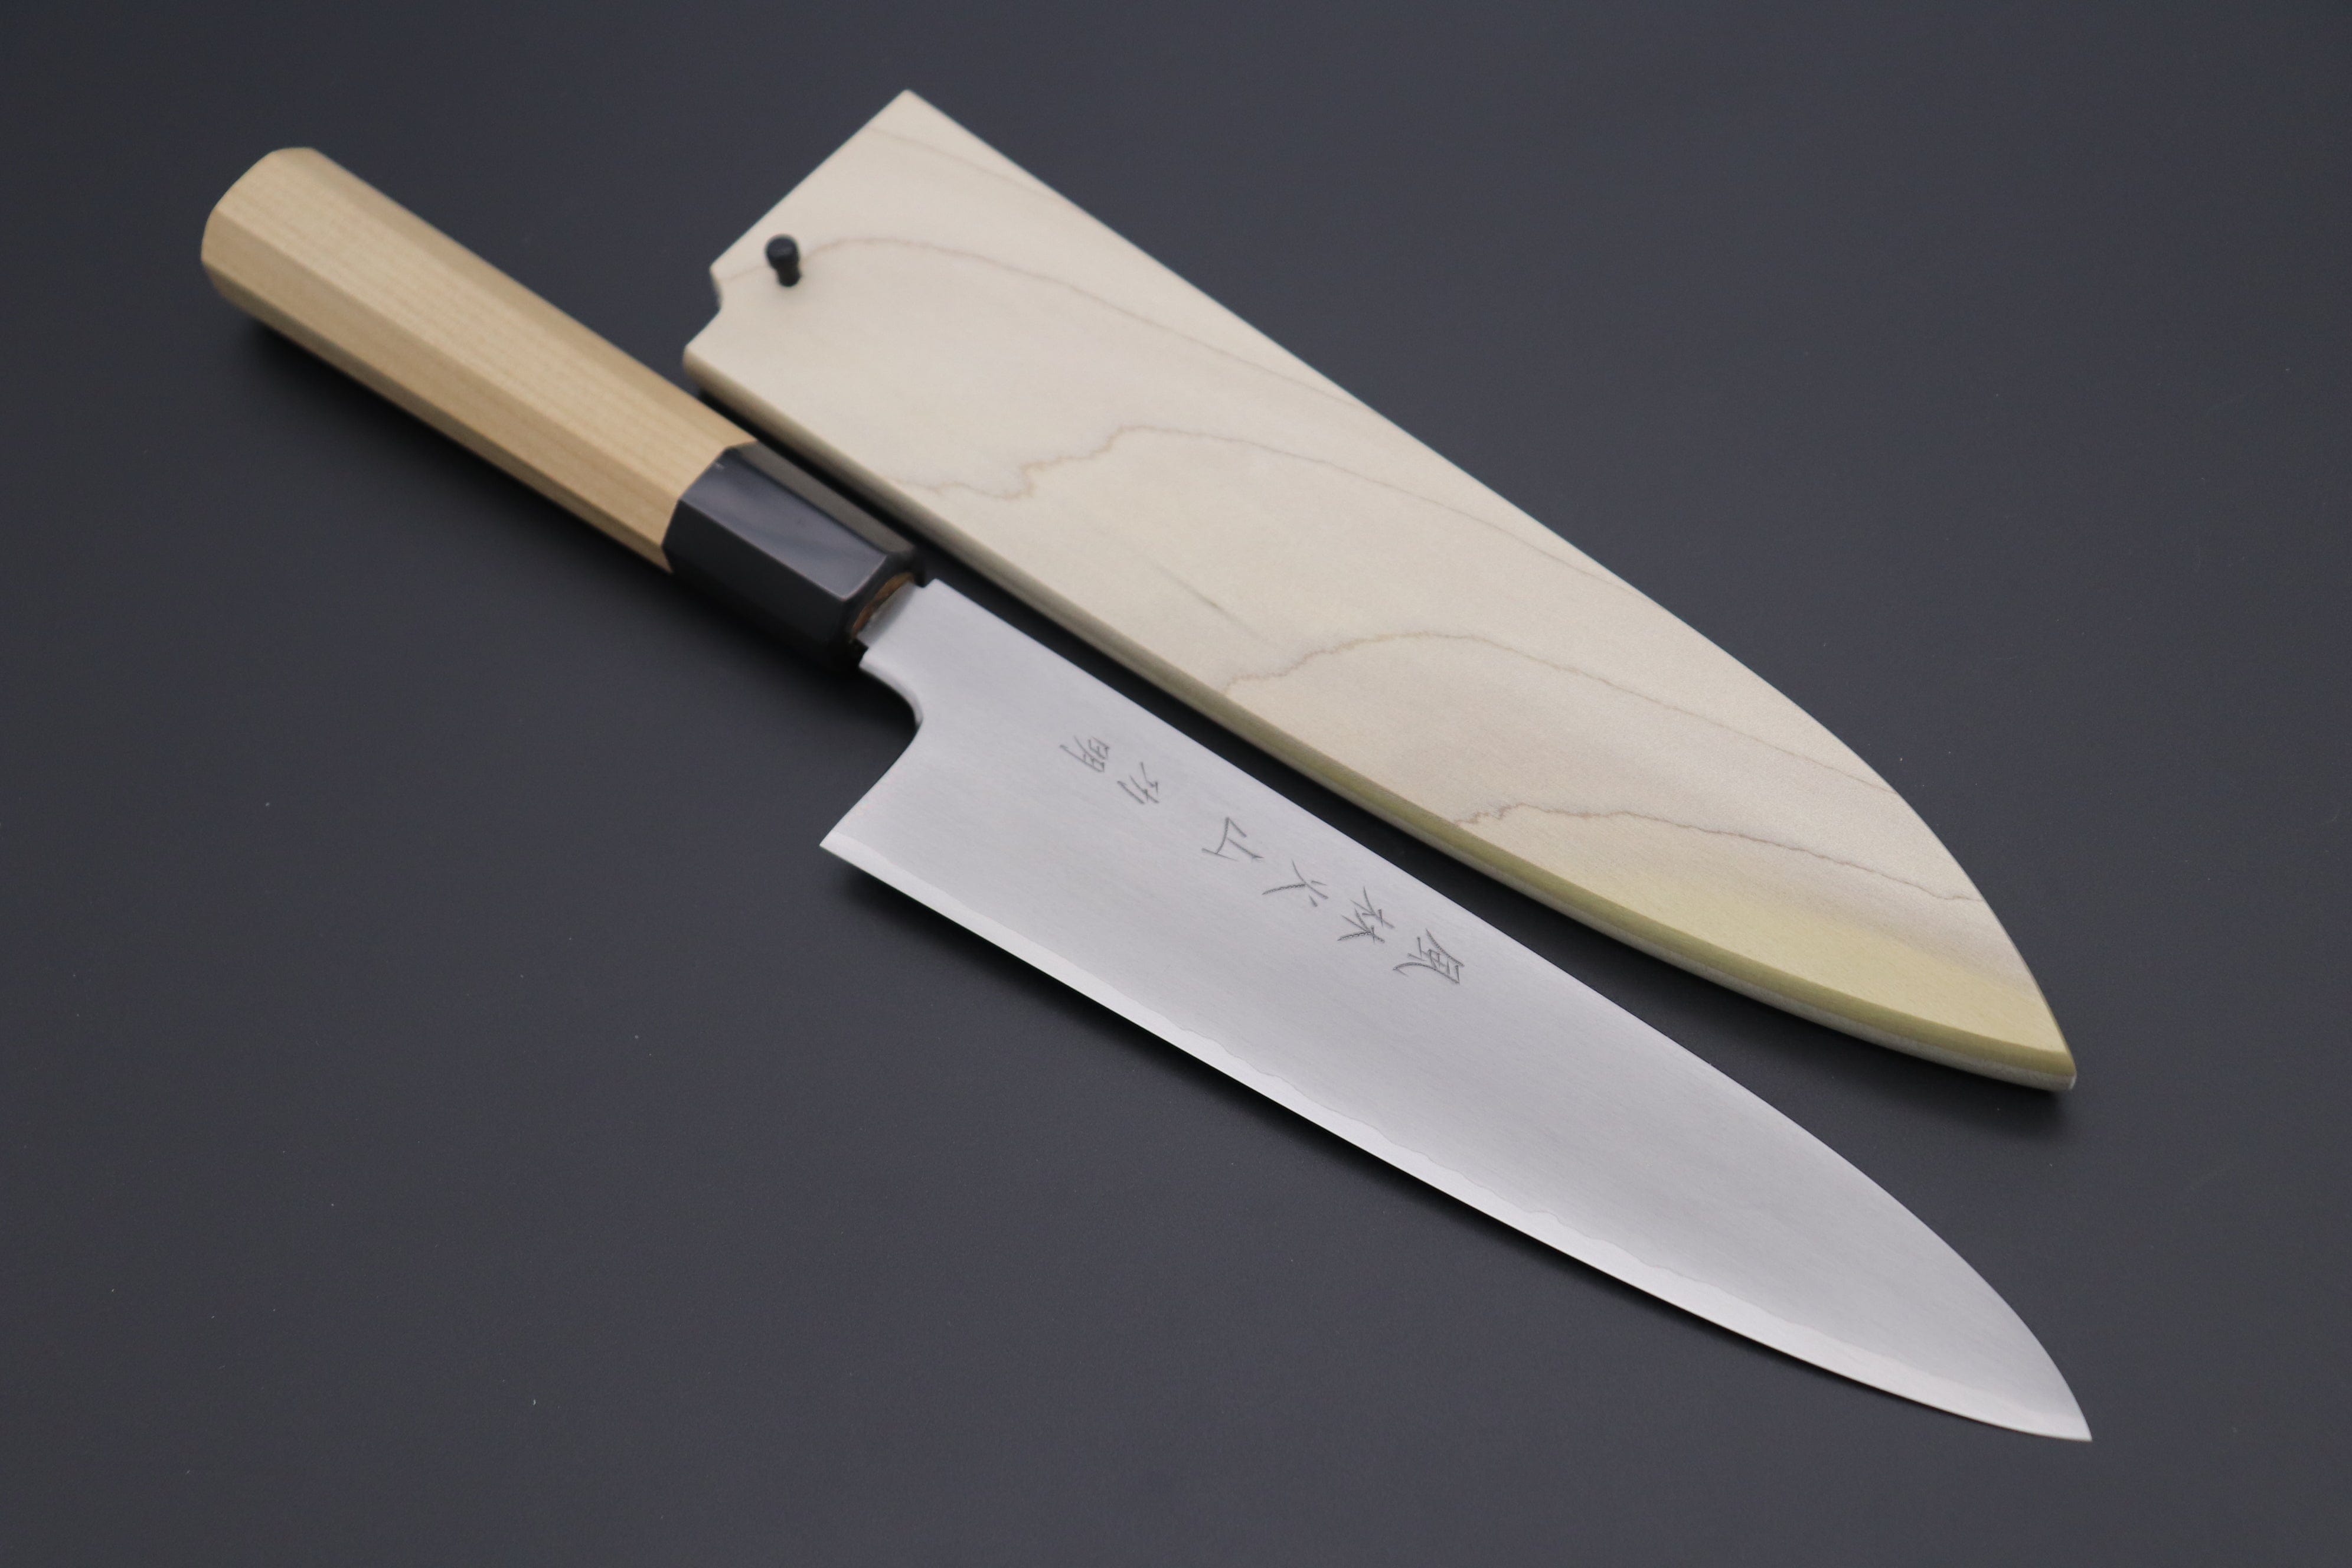 Chinese Cleaver Chef Knife Cuisine Cooking Tools Sandalwood Handle